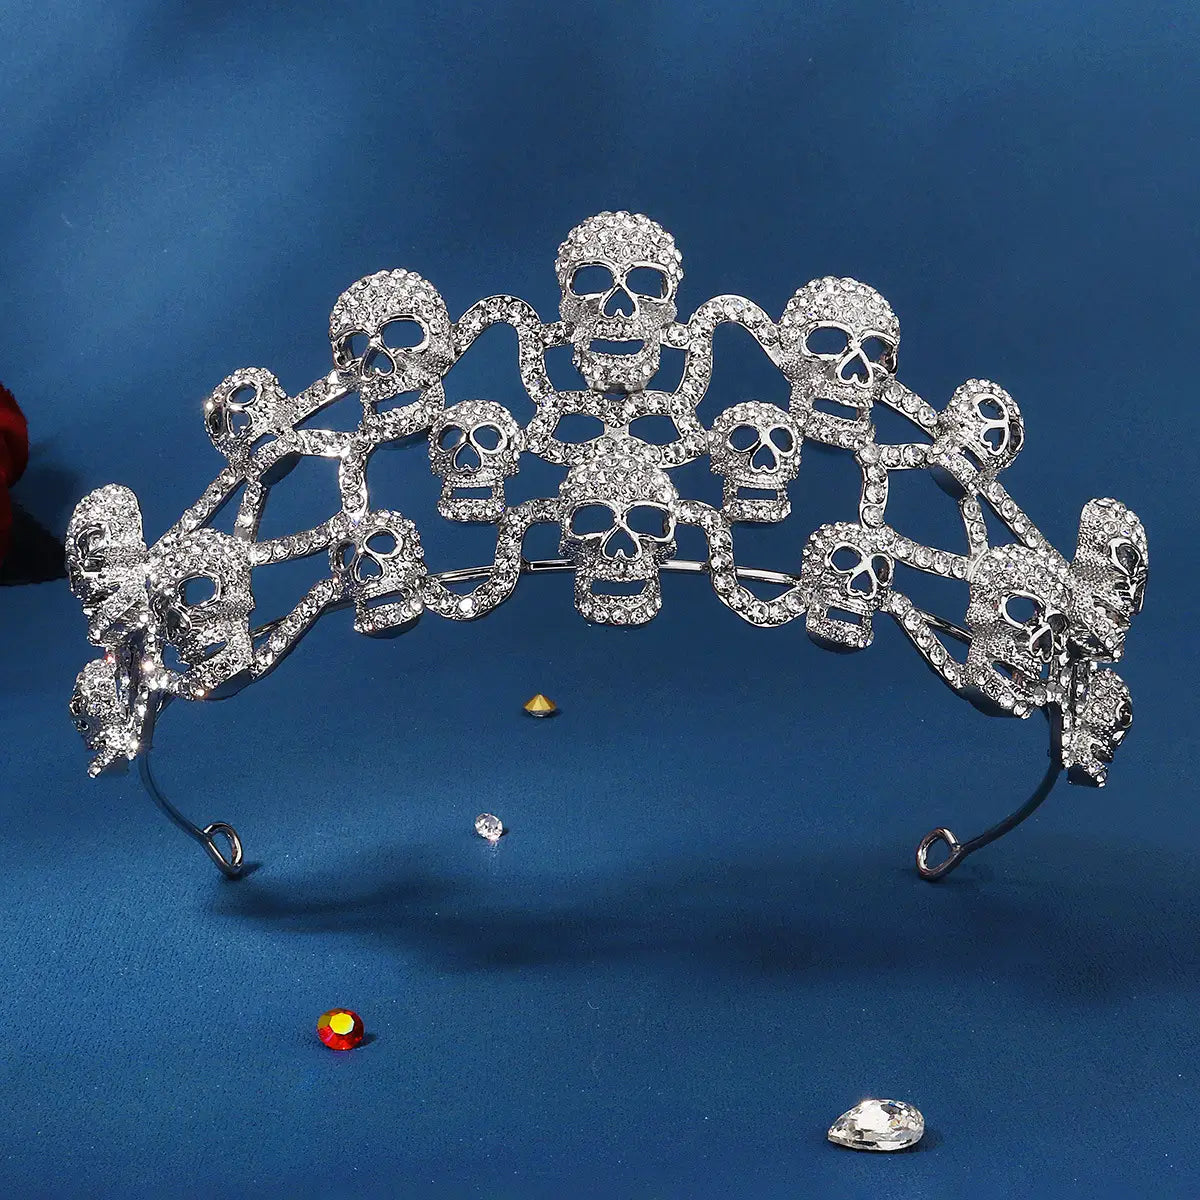 Dark Skull Crown Jewelry for Halloween Party